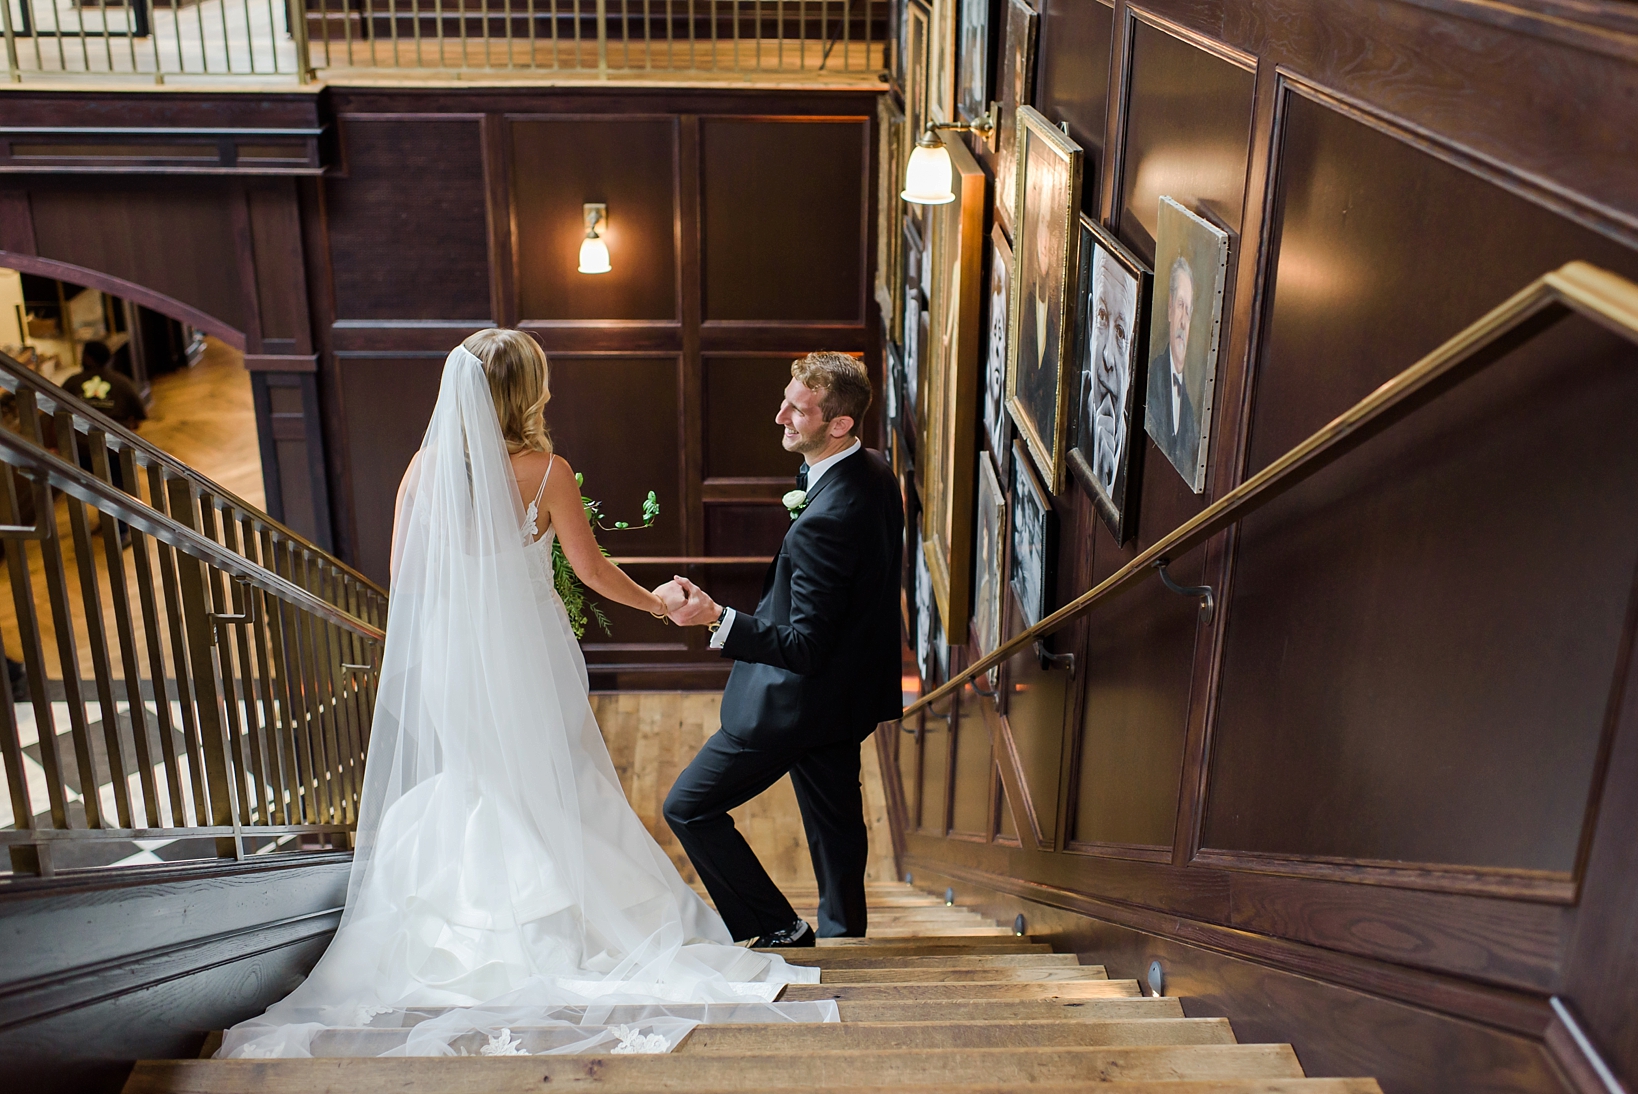 Groom helping his Bride down a flight of stairs surrounded by portraits of historical figures on the way to their Oxford Exchange wedding ceremony